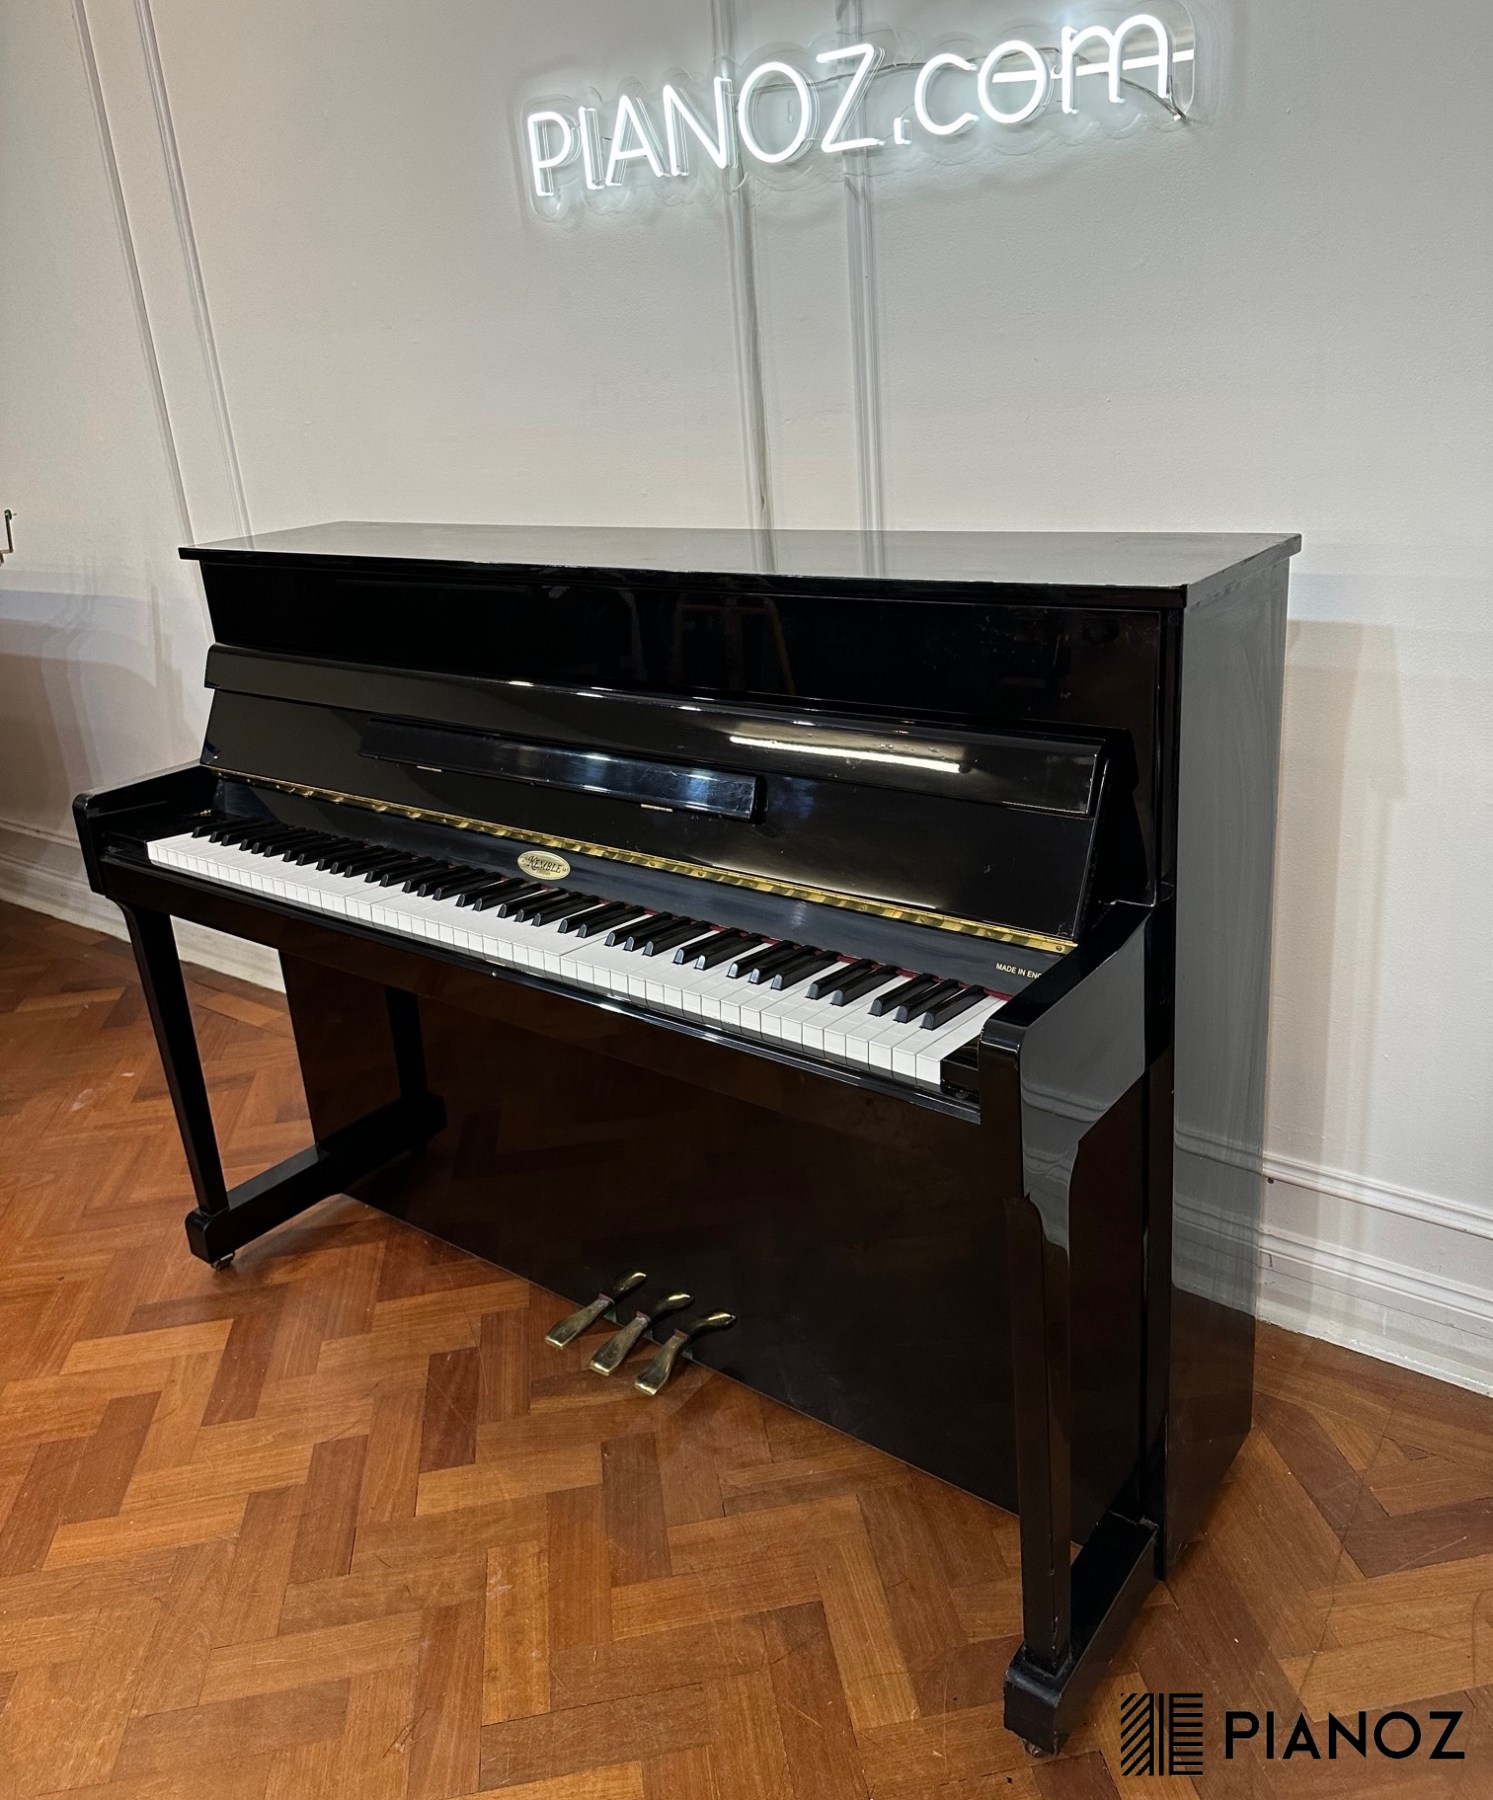 Kemble Oxford Upright Piano piano for sale in UK